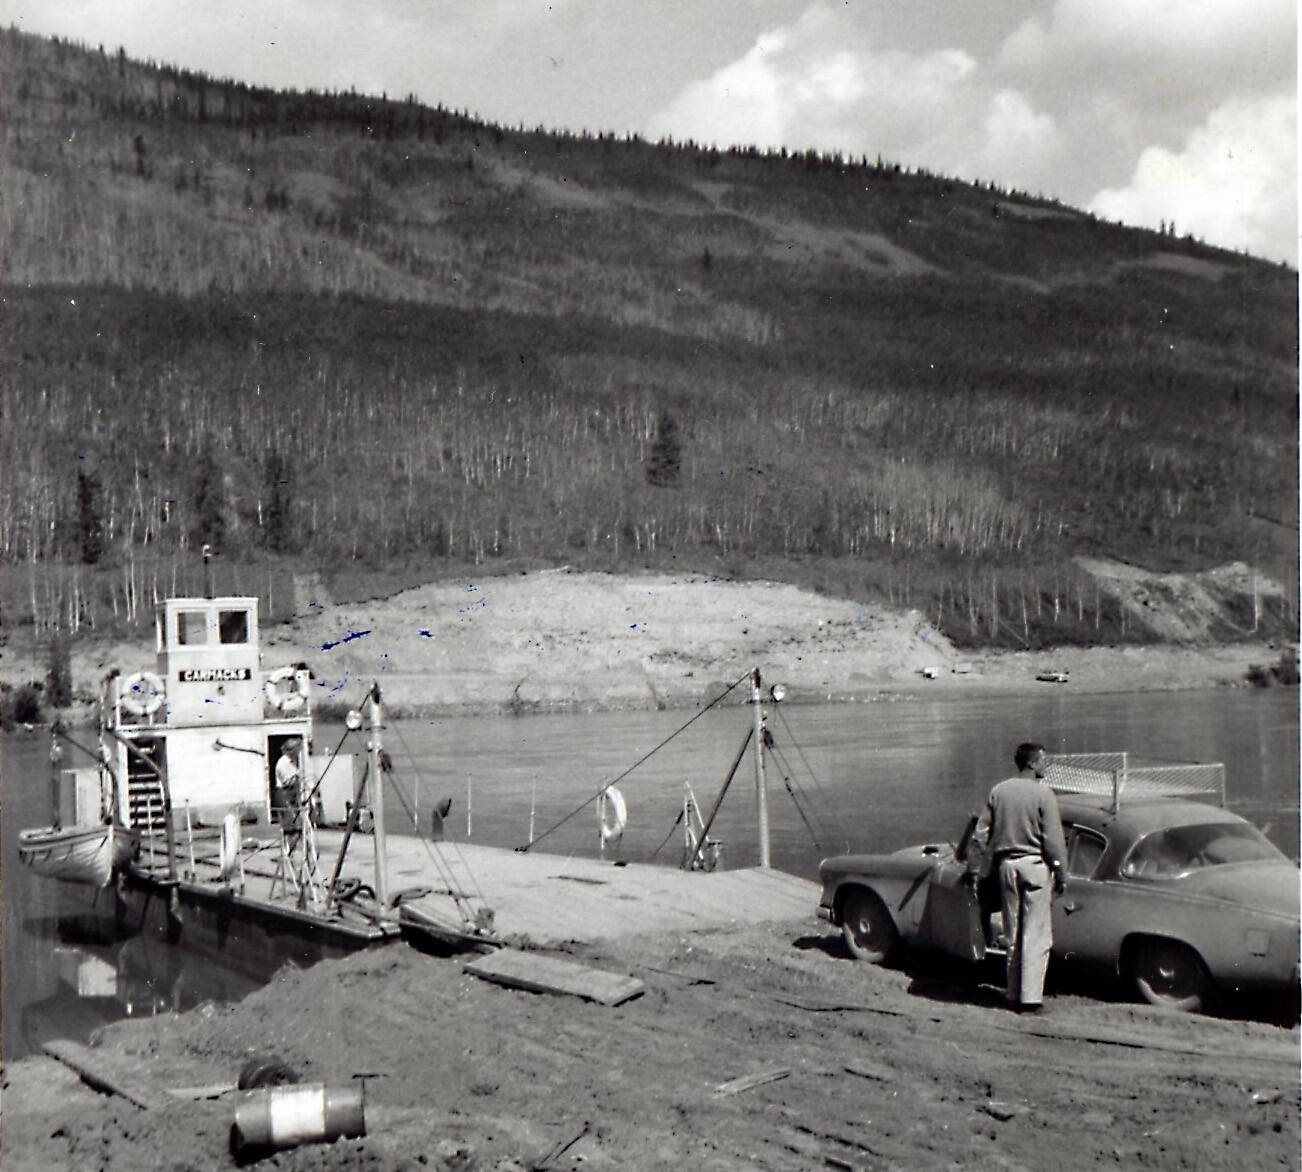 John Fenger took this photo when he traveled to Alaska in 1954 with Drs. Helen and Robert Whaley. Here, they are preparing to take their vehicles across the Stuart River in the Yukon Territory. Robert Whaley is standing by his car, while Helen Whaley is standing aboard the ferry. (Photo courtesy of the Fenger Family Collection)